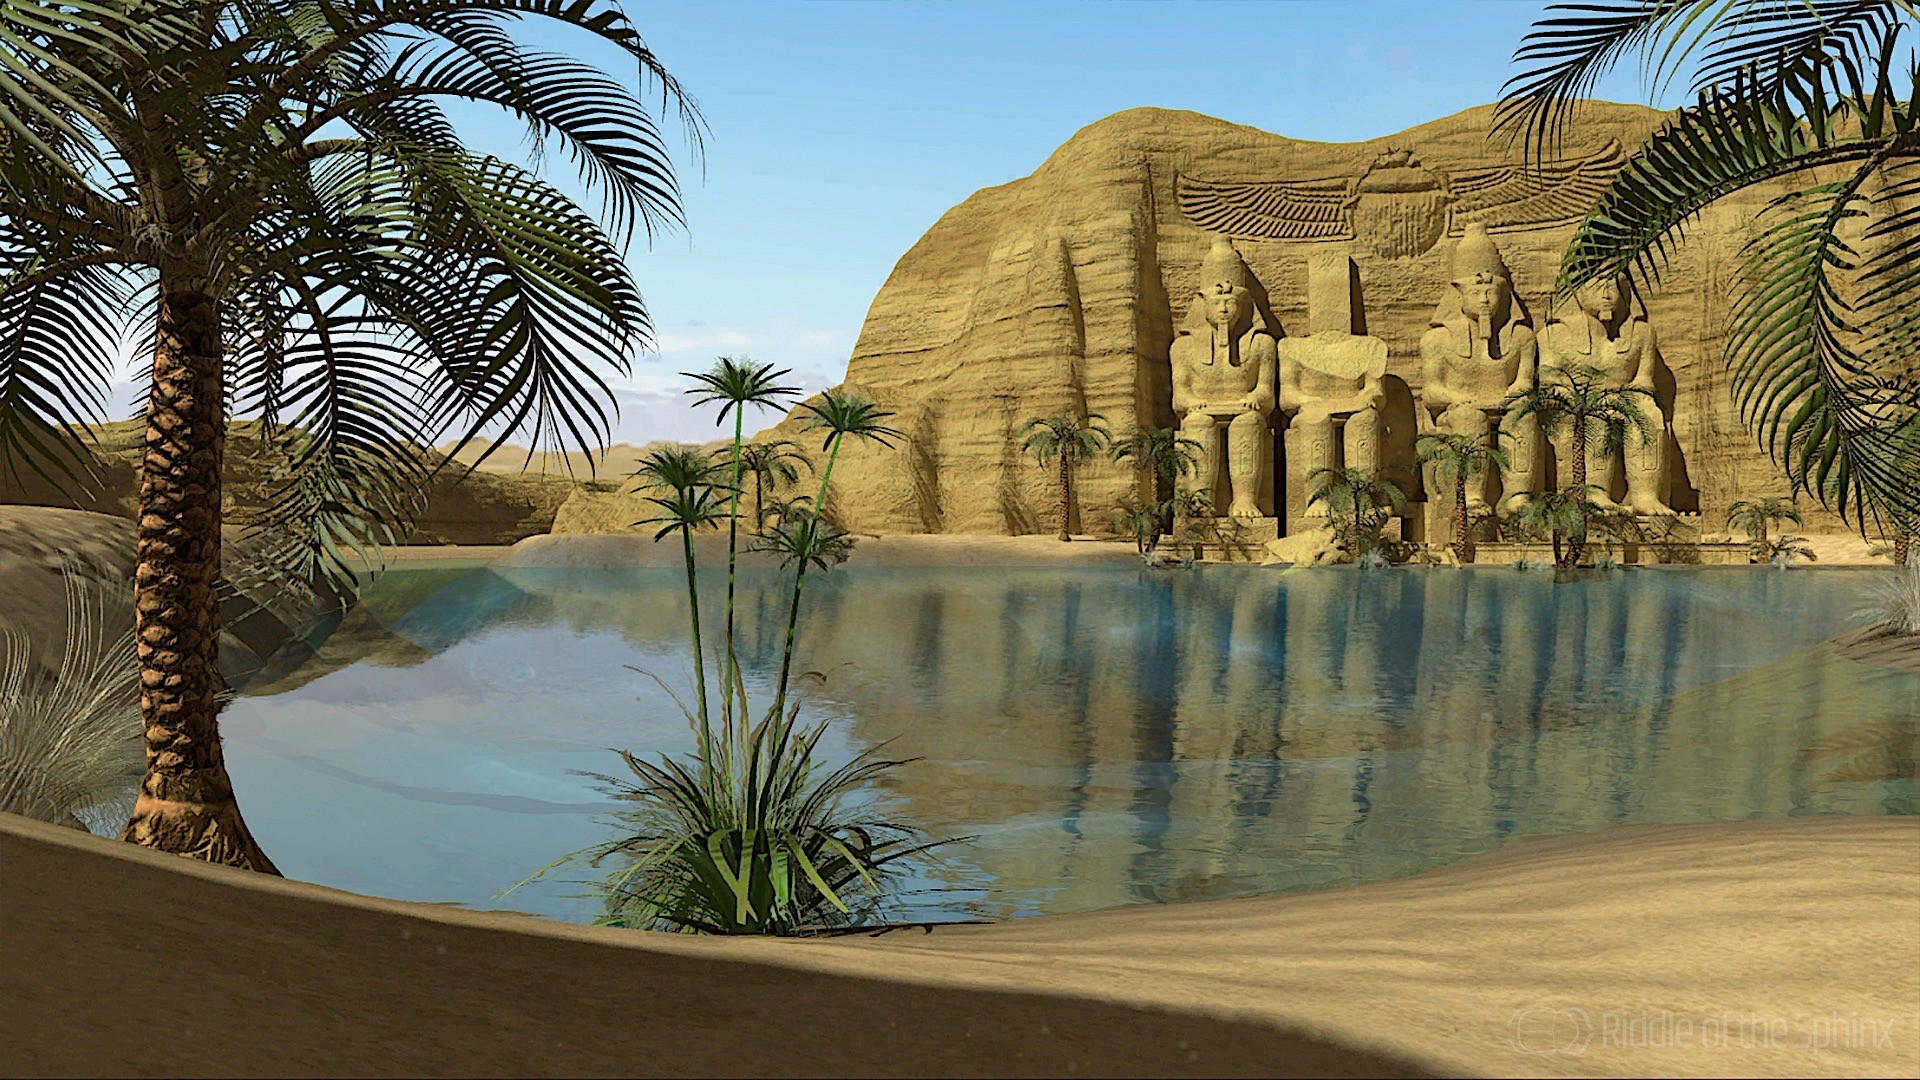 Riddle of the Sphinx The Awakening (Enhanced Edition) screenshot